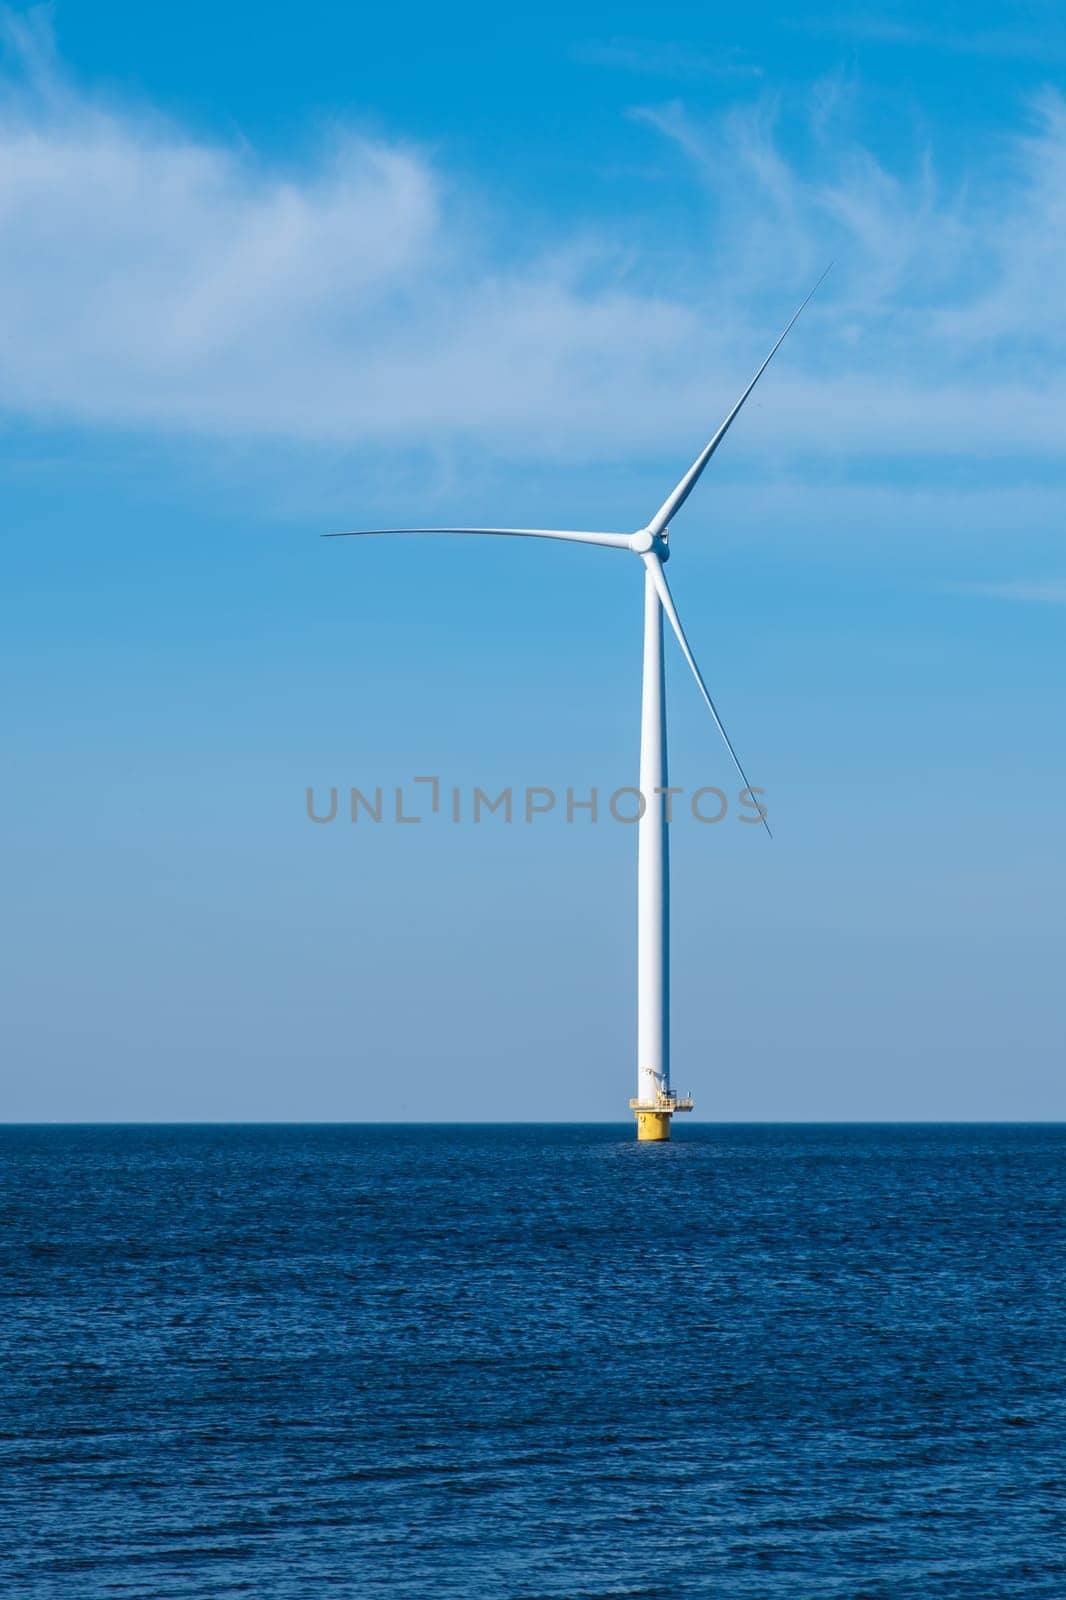 A solitary wind turbine stands tall in the vast ocean, harnessing the power of the wind to generate clean energy for a sustainable future by fokkebok